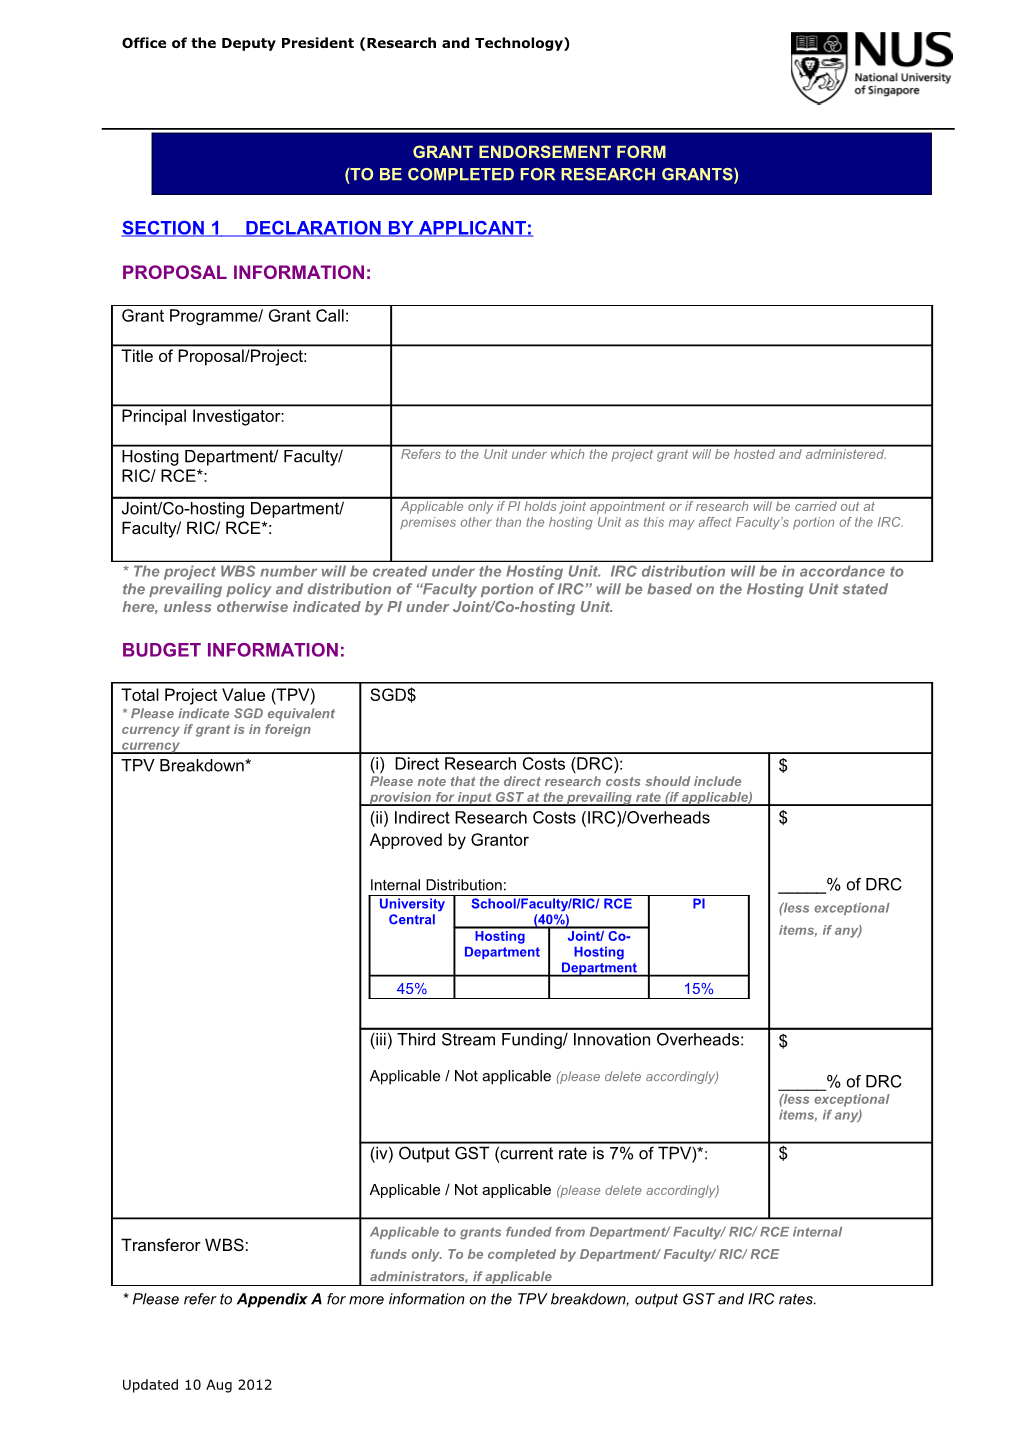 Grant Endorsement Form - for All Research Projects